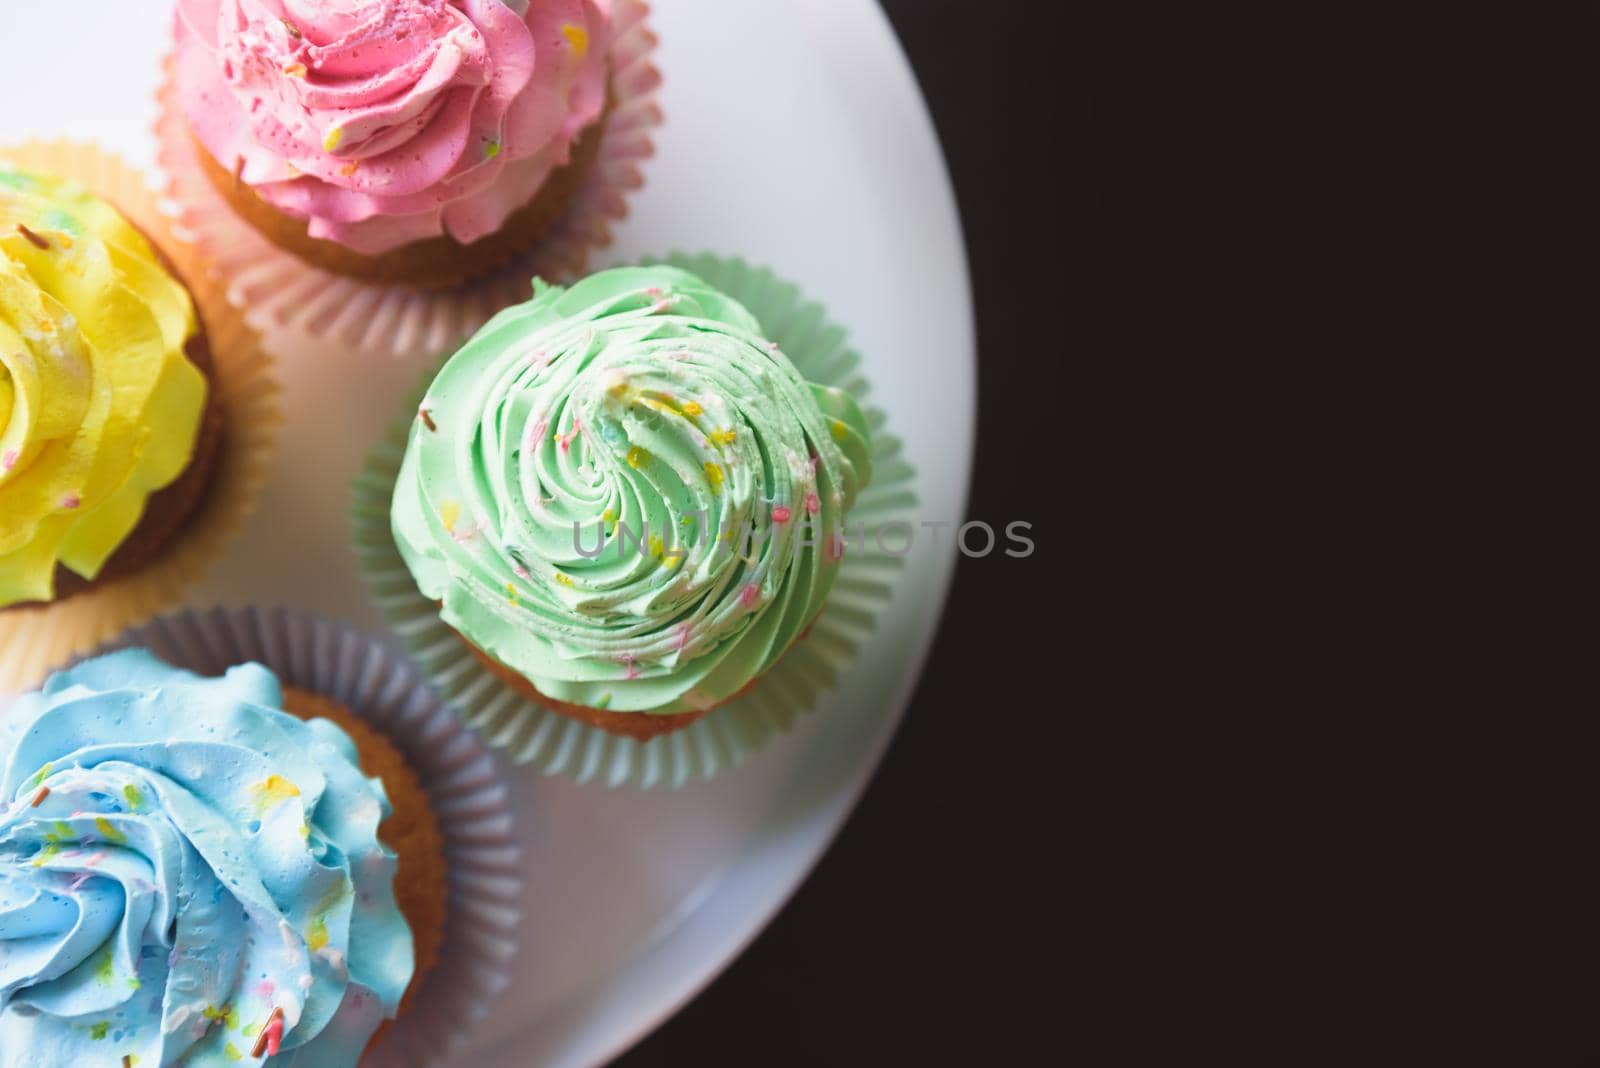 colorful cupcakes on black background.